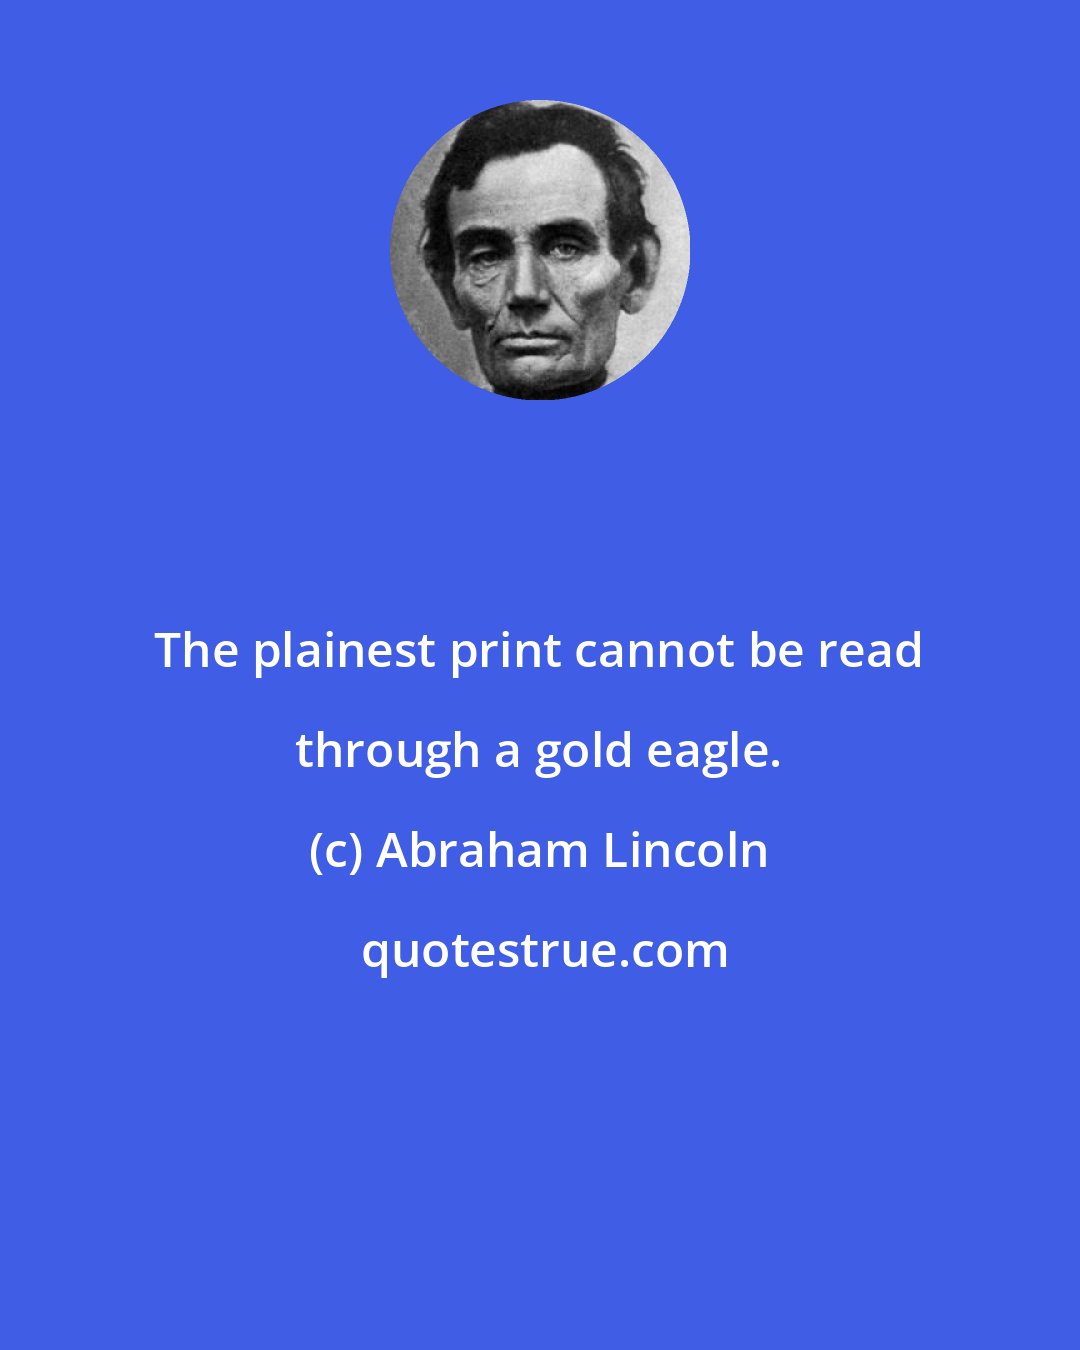 Abraham Lincoln: The plainest print cannot be read through a gold eagle.